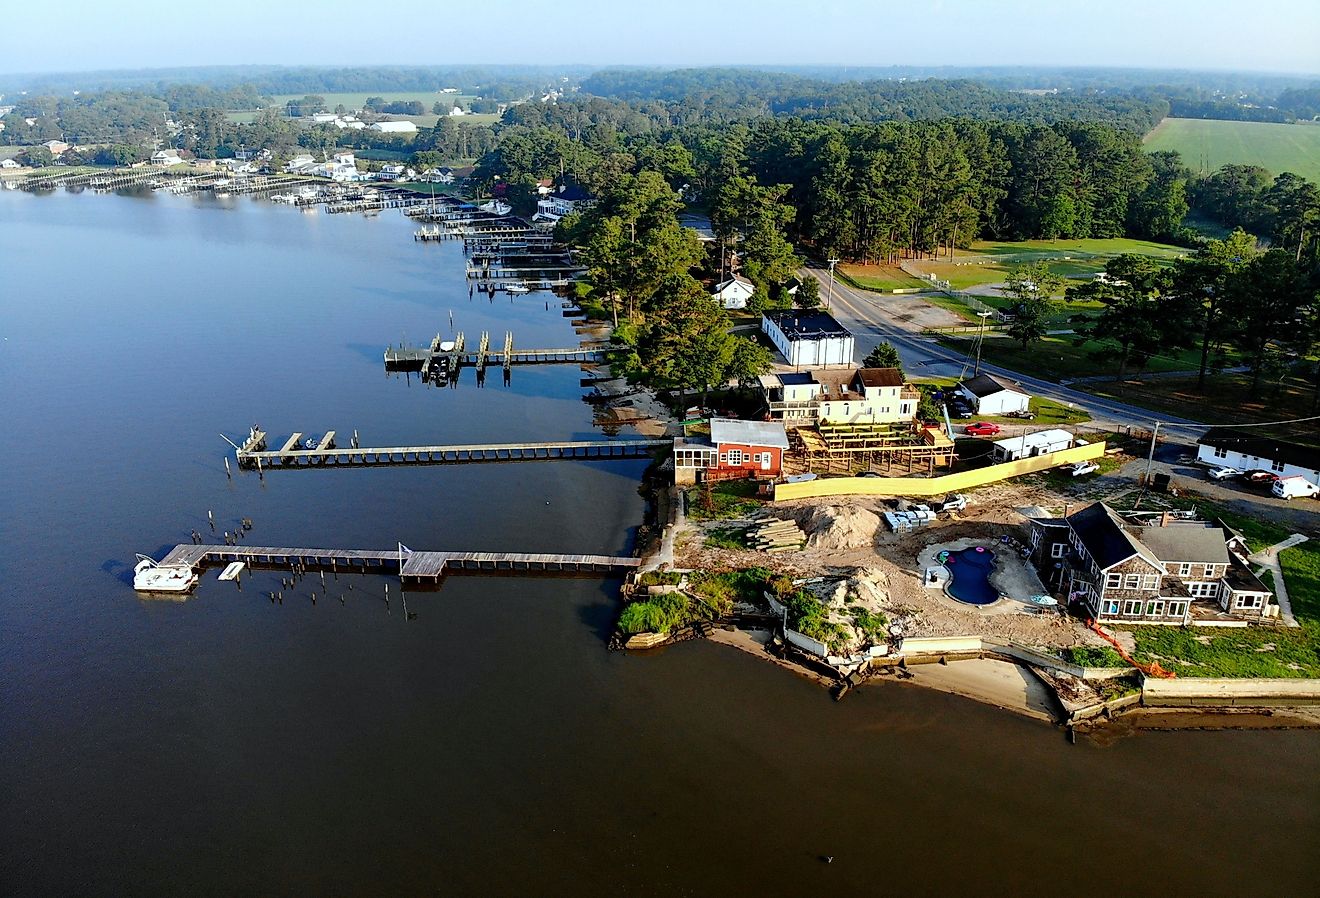 The aerial view of the waterfront homes with a private dock near Millsboro, Delaware.